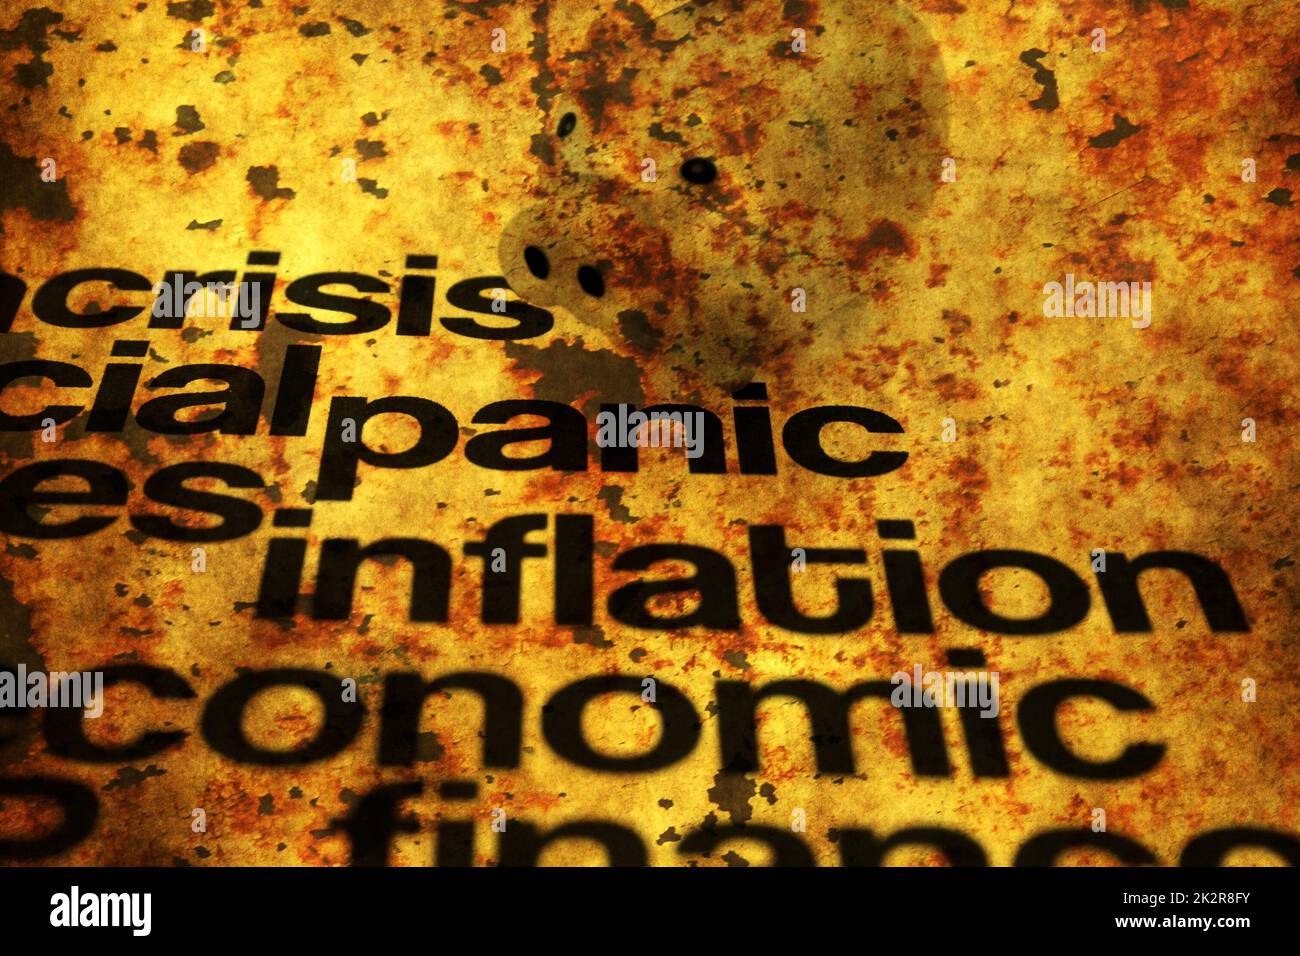 Crisis and inflation grunge concept Stock Photo